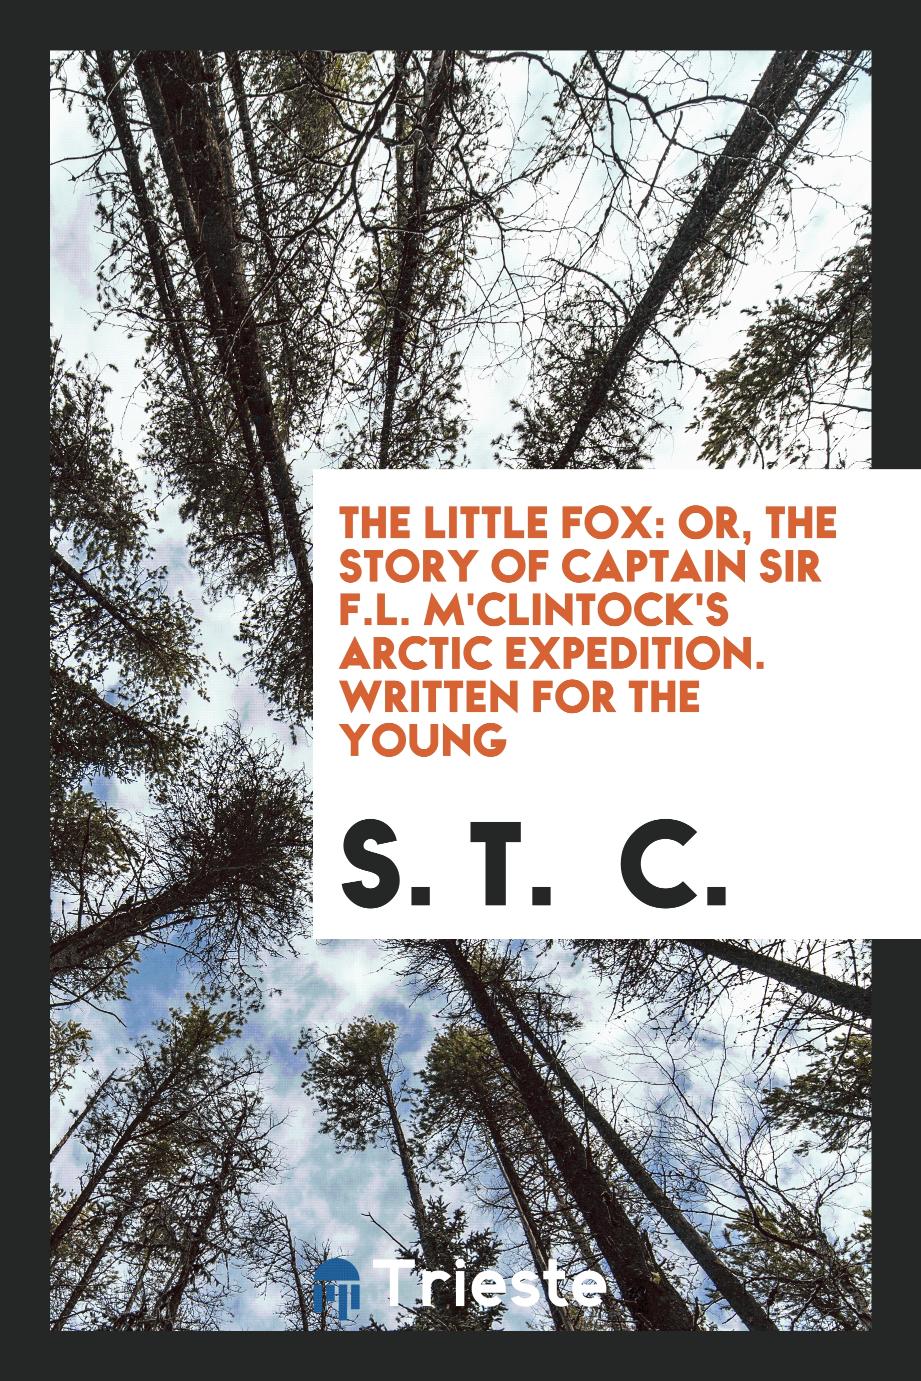 The Little Fox: Or, The Story of Captain Sir F.L. M'Clintock's Arctic Expedition. Written for the Young